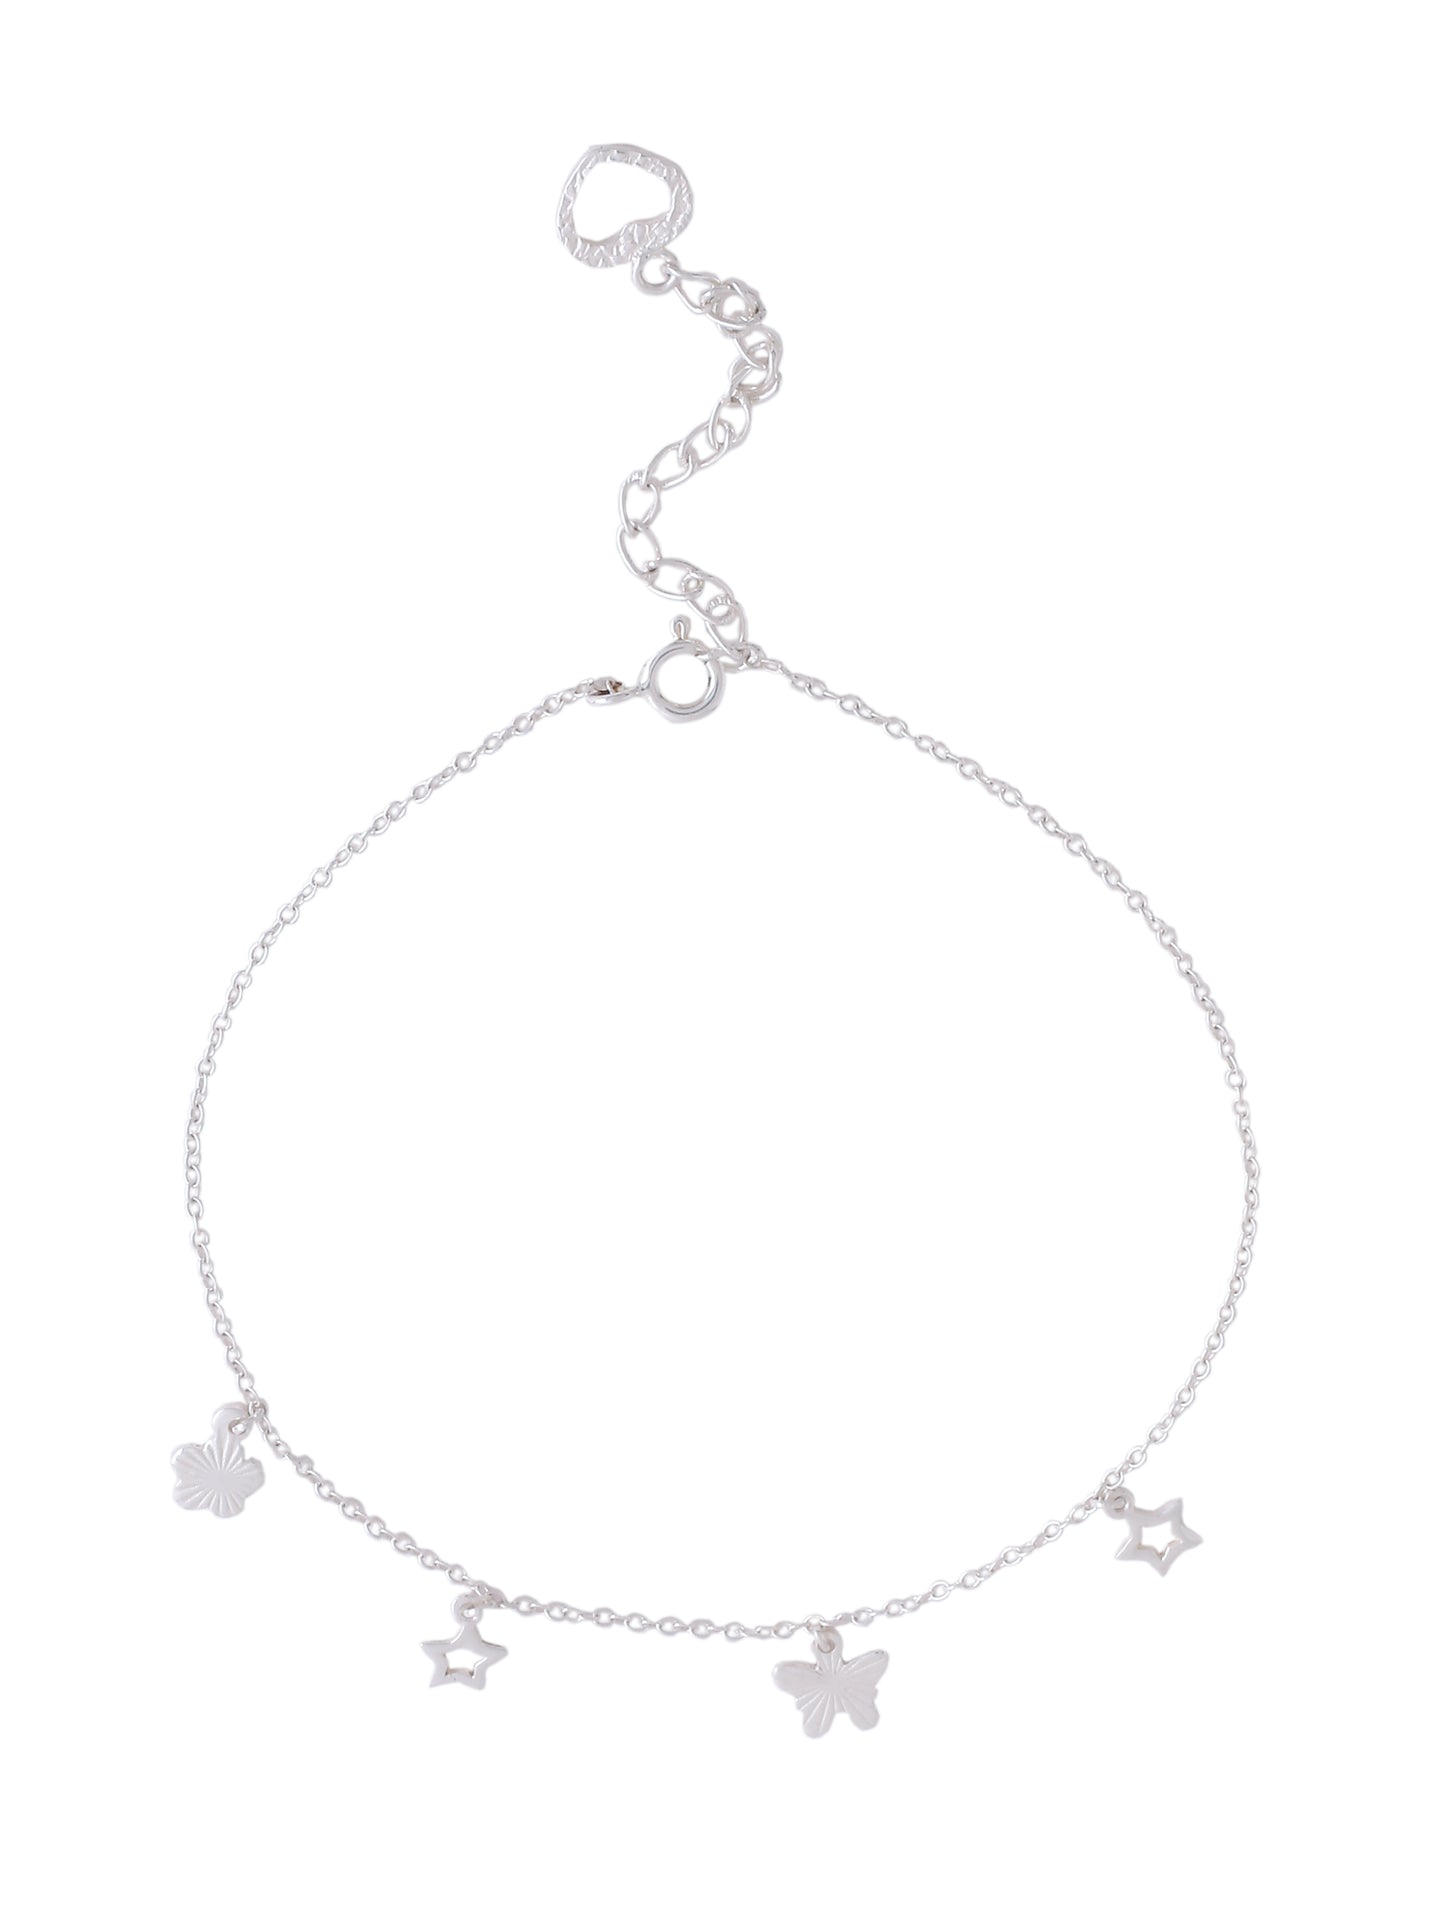 Celestial Charm Anklet in Sterling Silver